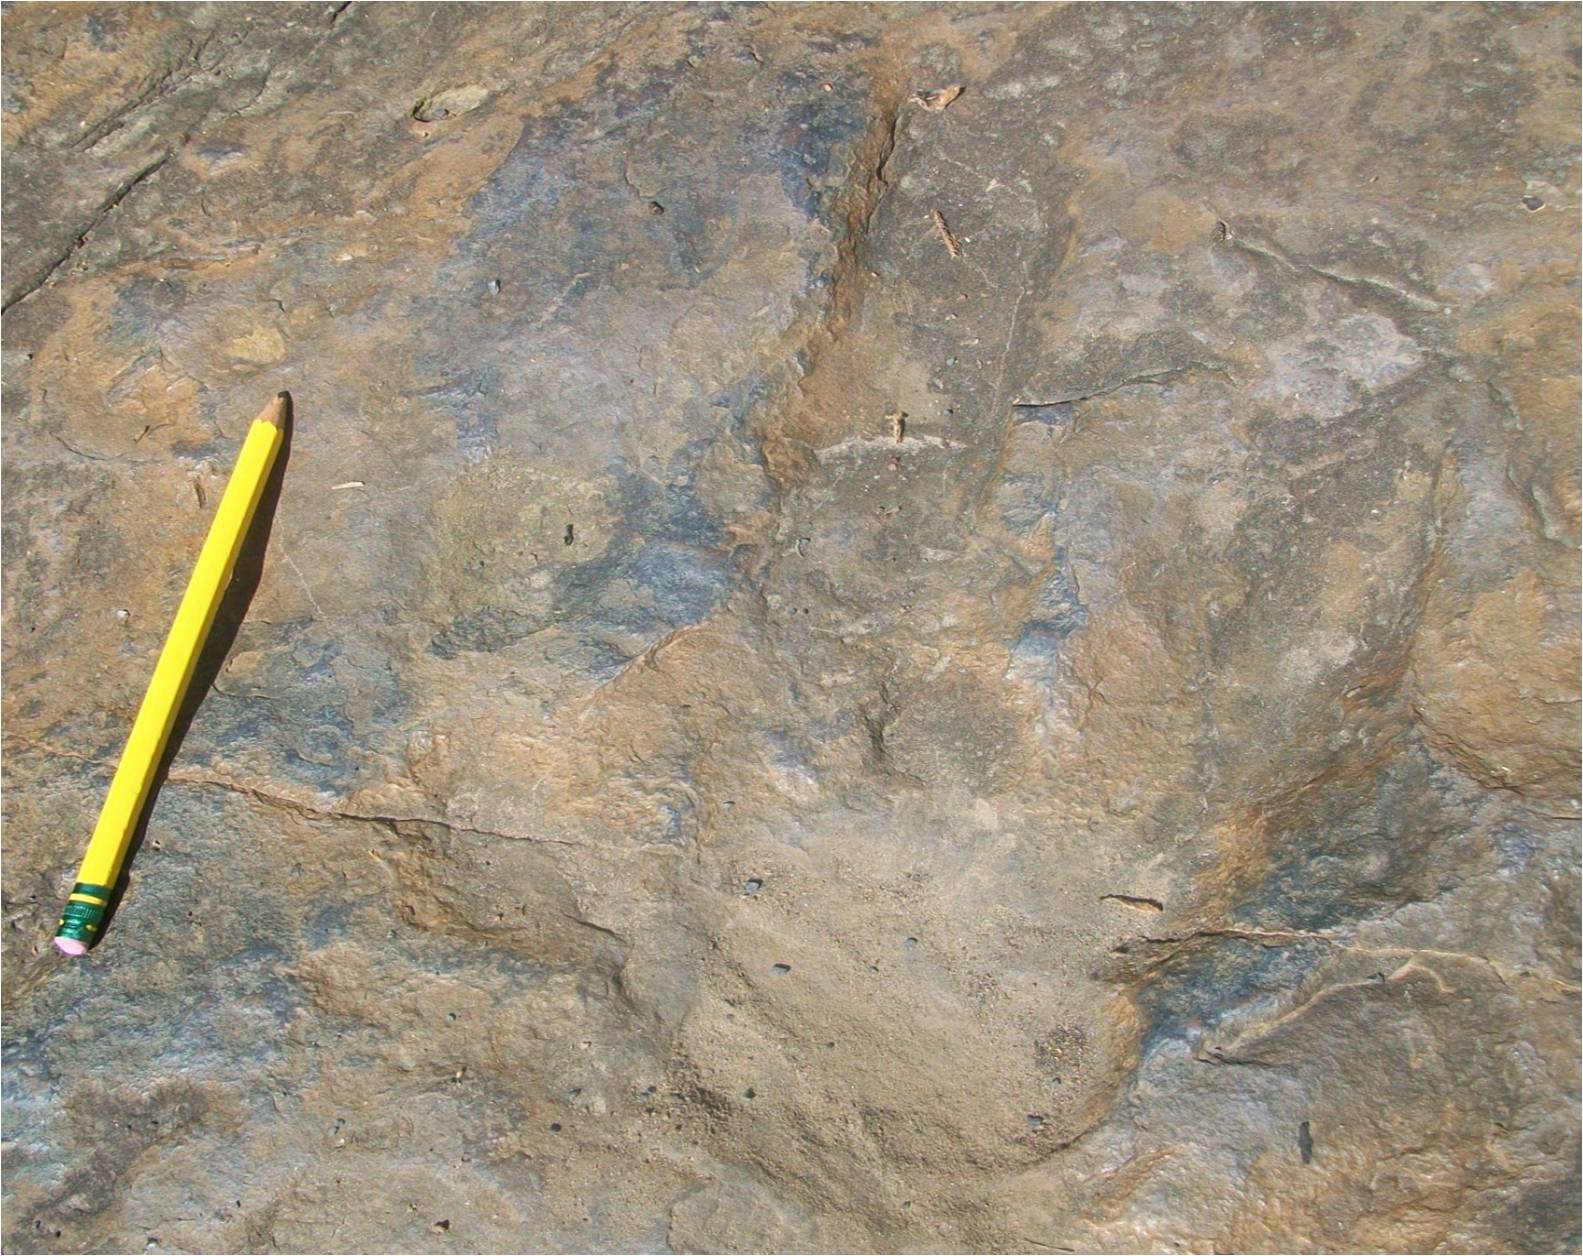 Photograph of a track of Eubrontes from Dinosaur Footprints Reservation in Massachusetts. The photo shows a large three-toed track impression with a yellow pencil for scale. The track is longer than the pencil.